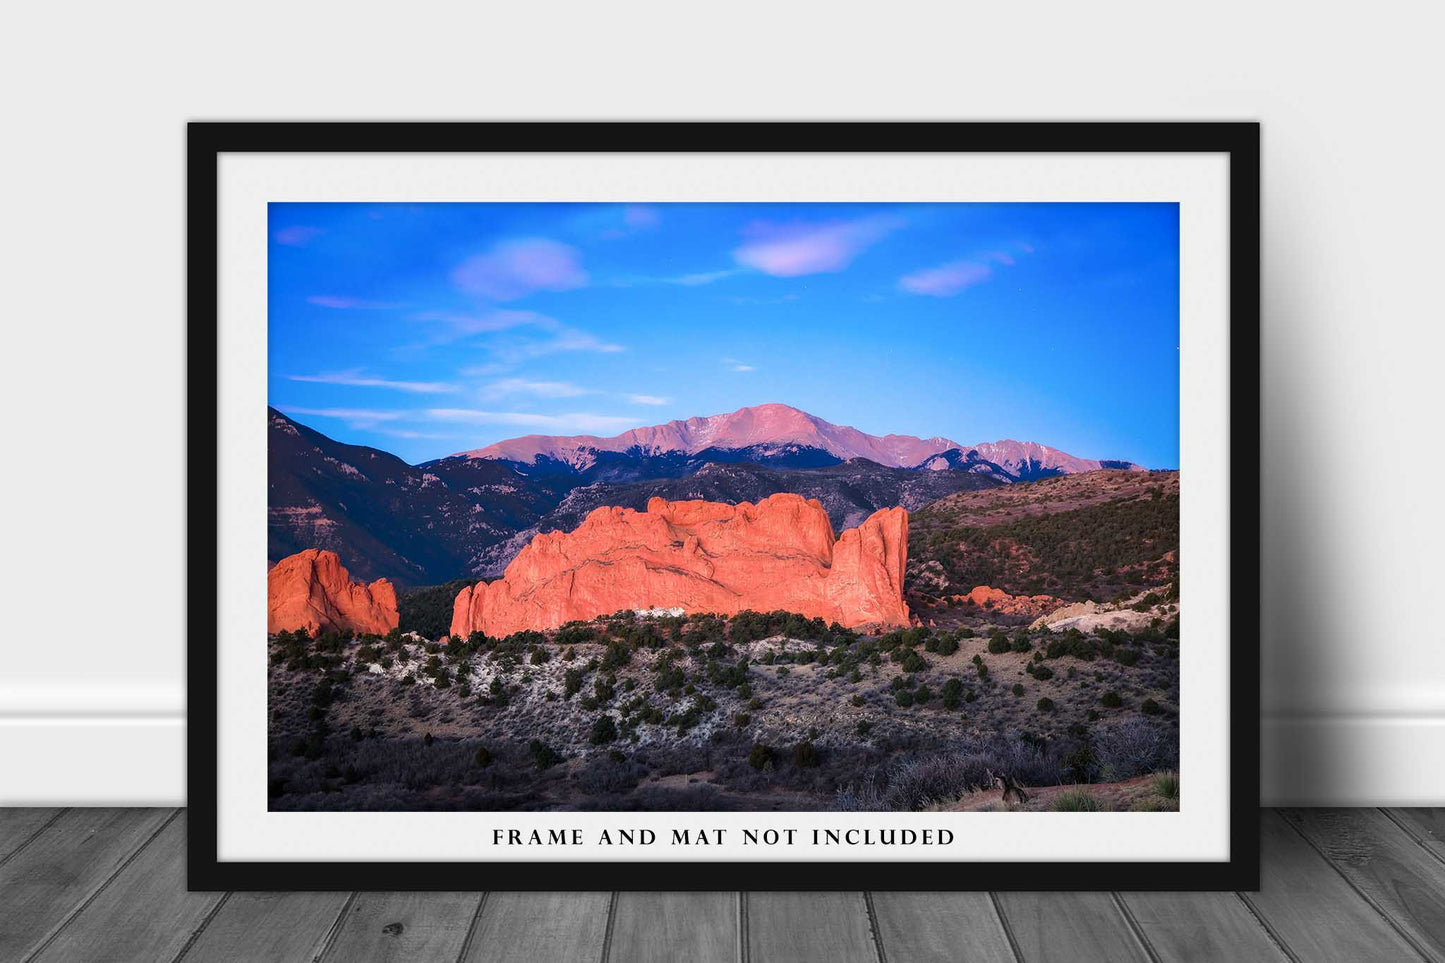 Western Photography Print - Picture of Pikes Peak Over Garden of the Gods in Colorado Springs - Rocky Mountain Decor Wall Art Photo Artwork